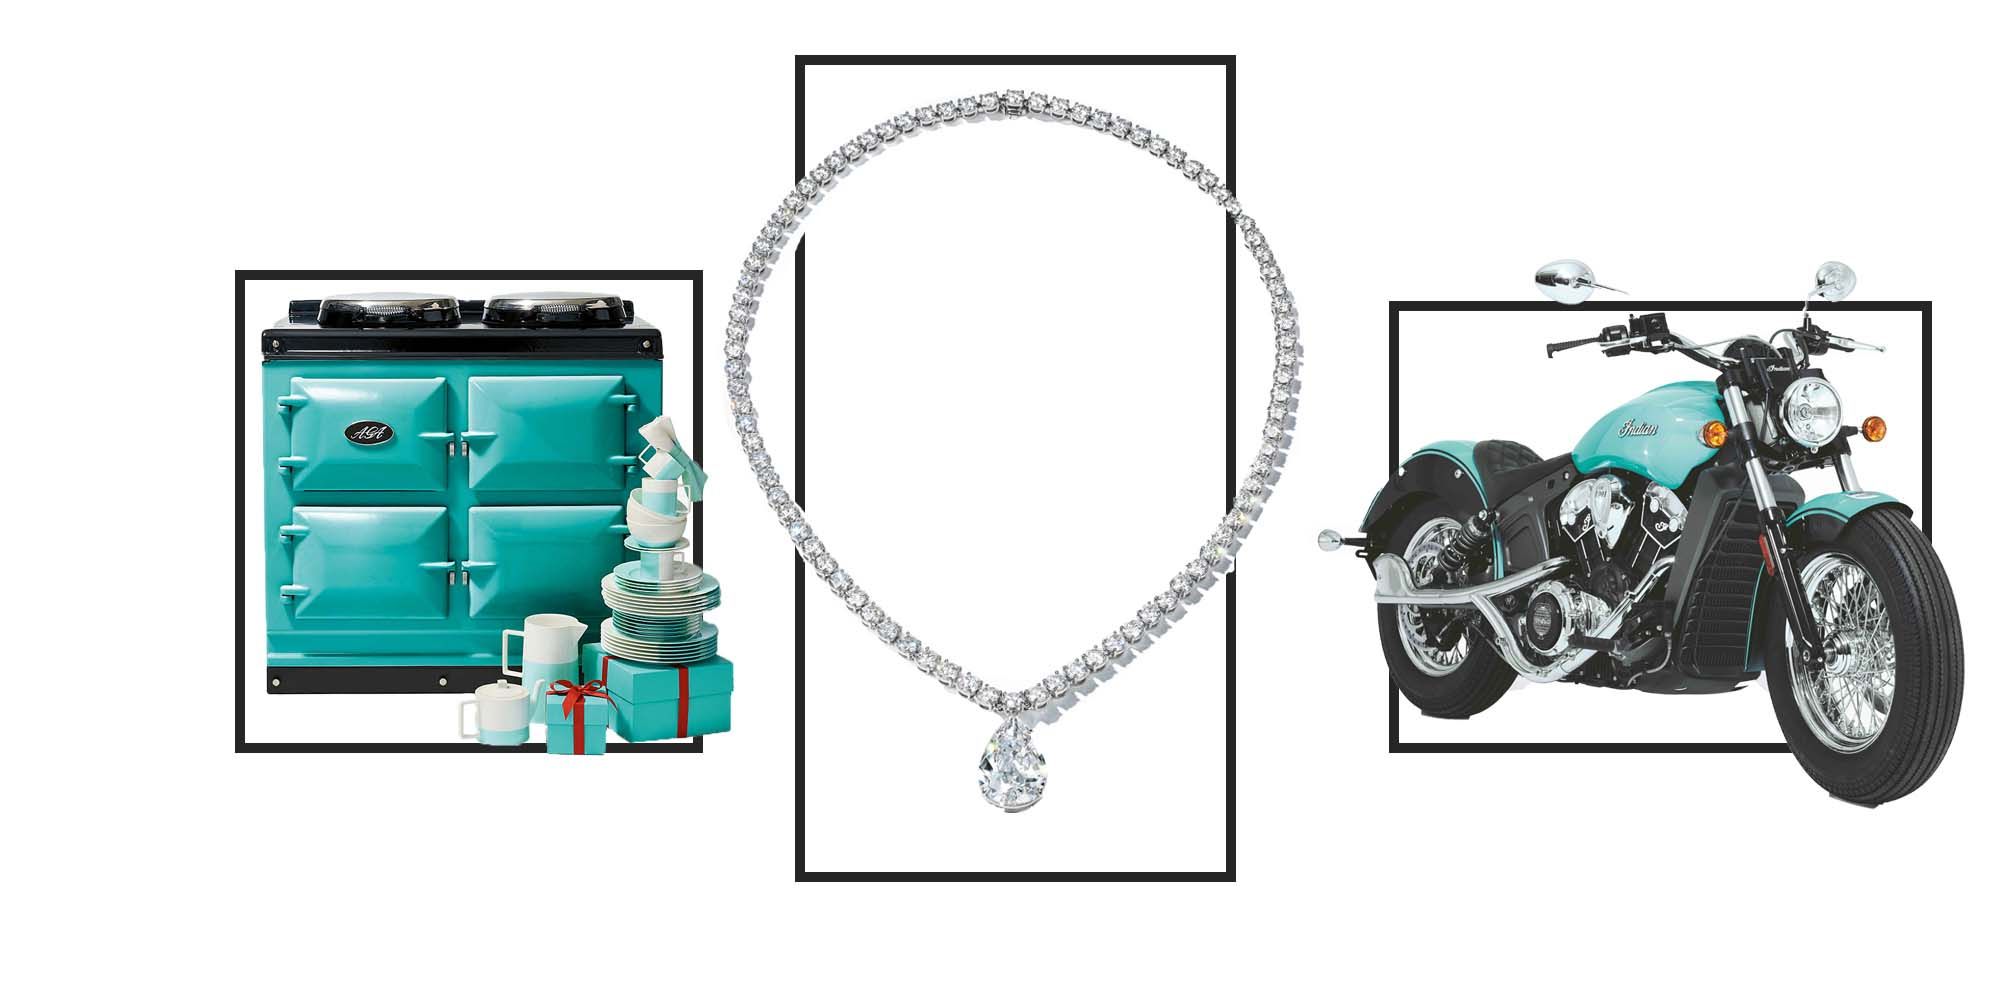 Tiffany & Co launches one-of-a-kind gifts for Christmas